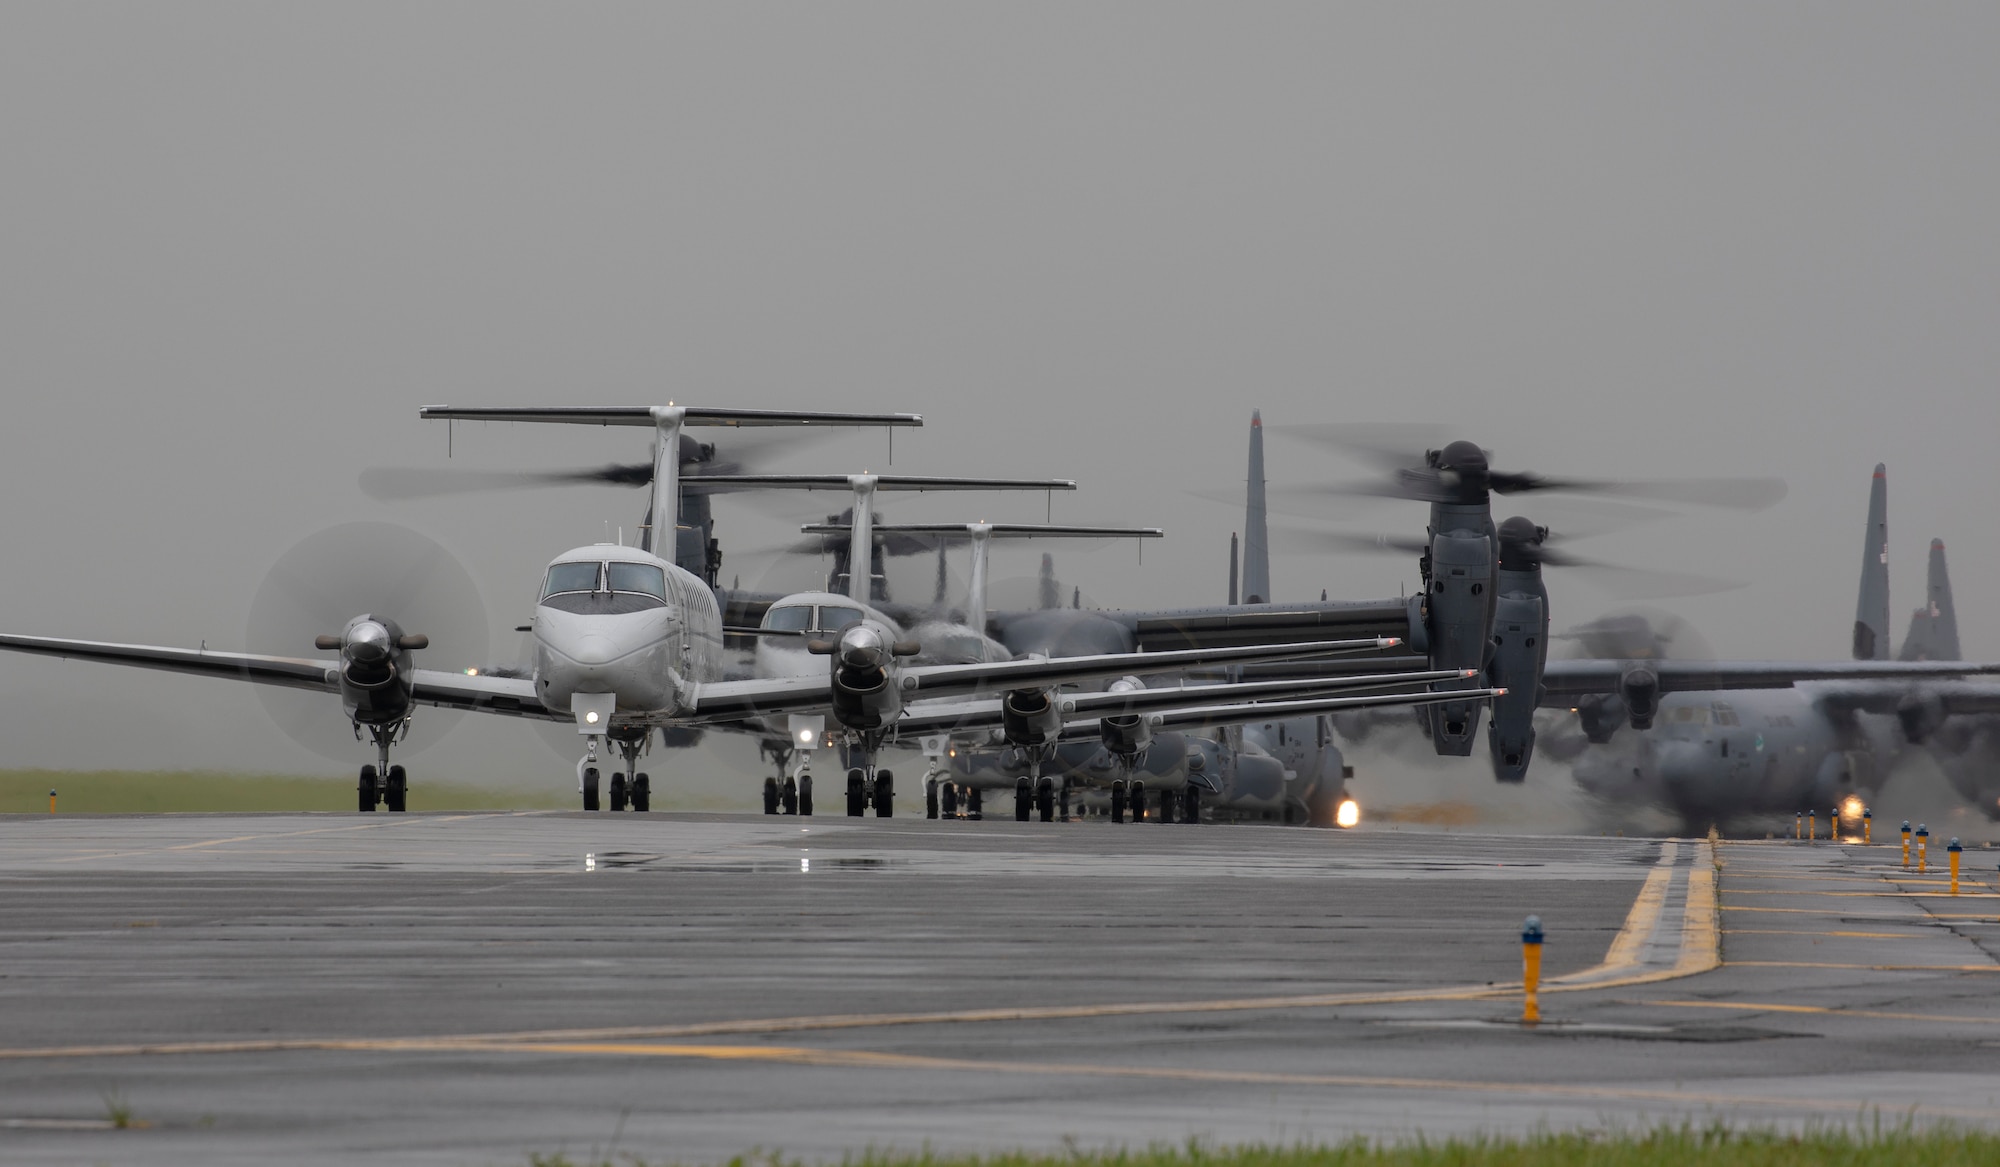 Aircraft from the 36th Airlift Squadron, 459th Airlift Squadron and 21st Special Operations Squadron taxi their way across the Yokota Air Base, Japan flightline during the elephant walk portion of the Samurai Surge training exercise, May 21, 2020.